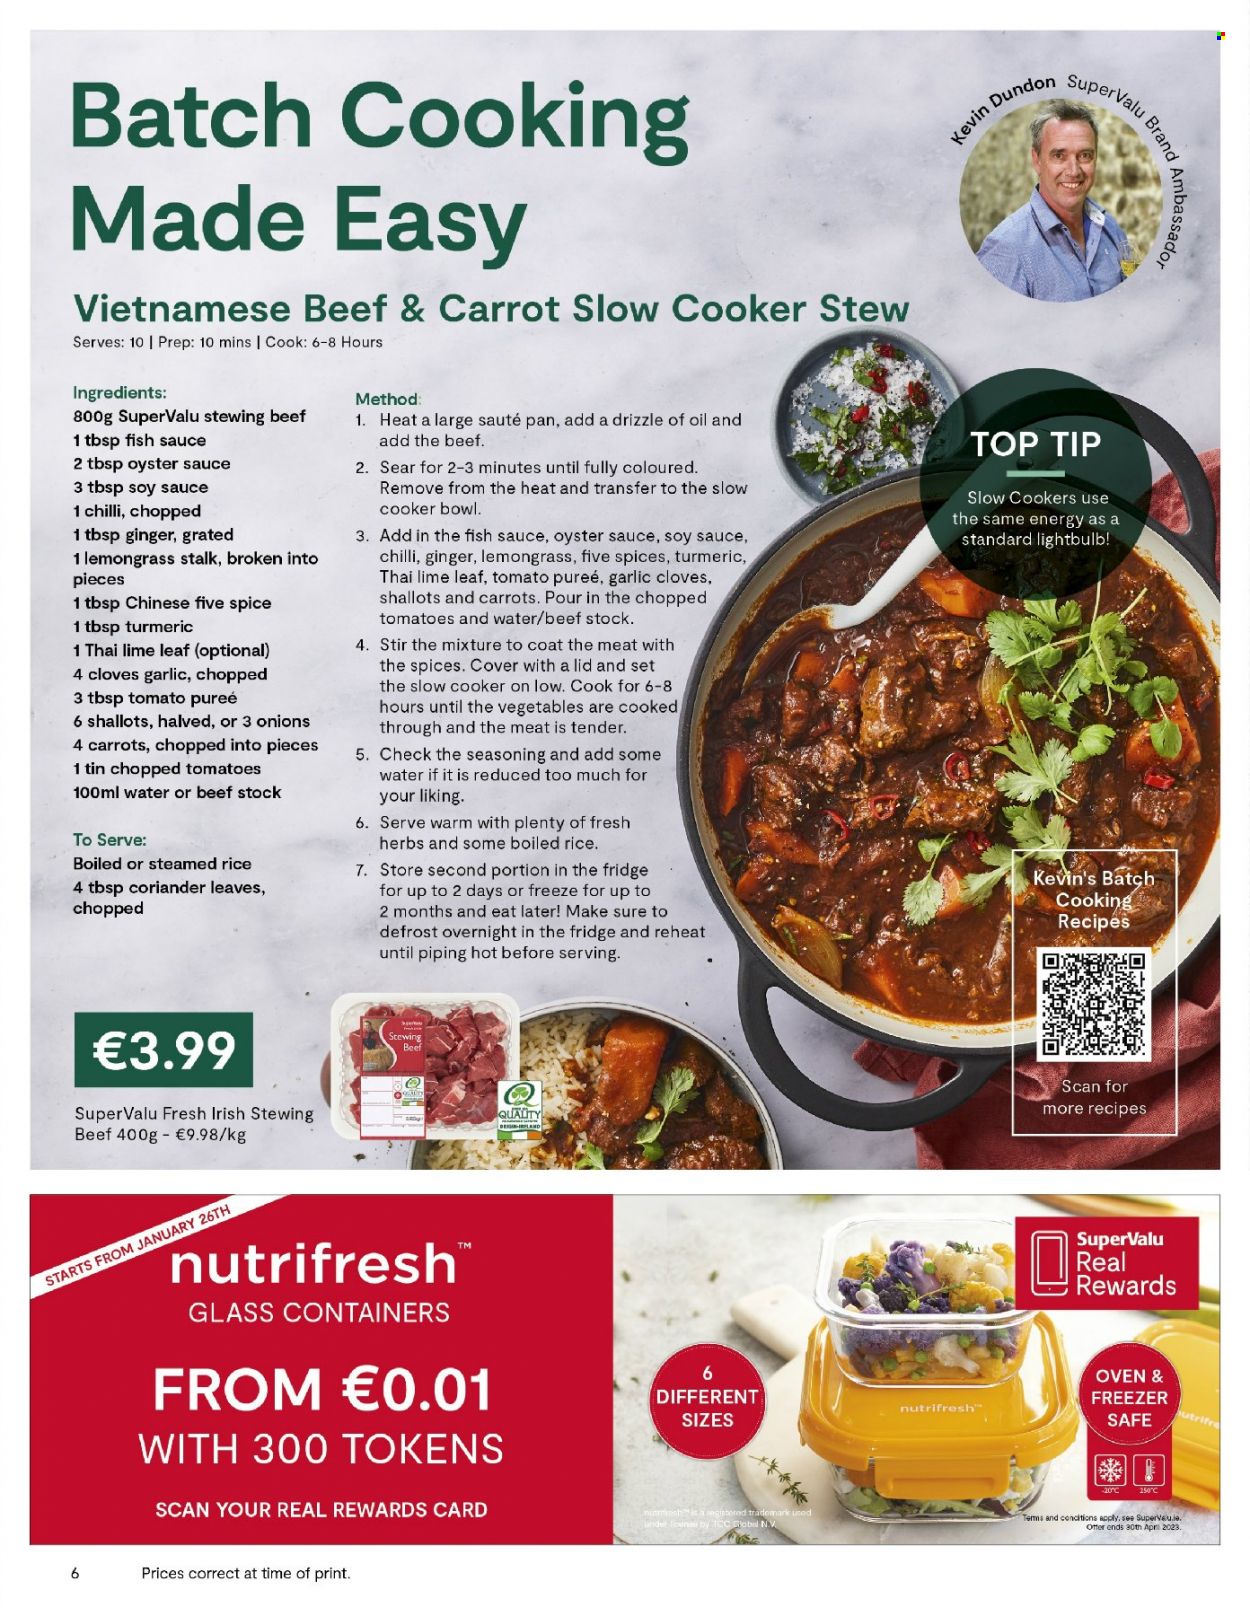 SuperValu offer  - Sales products - garlic, ginger, shallots, onion, oysters, fish, tomato sauce, tomato puree, chopped tomatoes, rice, turmeric, cloves, spice, coriander, fish sauce, soy sauce, oyster sauce, beef meat, stewing beef, Plenty, bowl. Page 6.